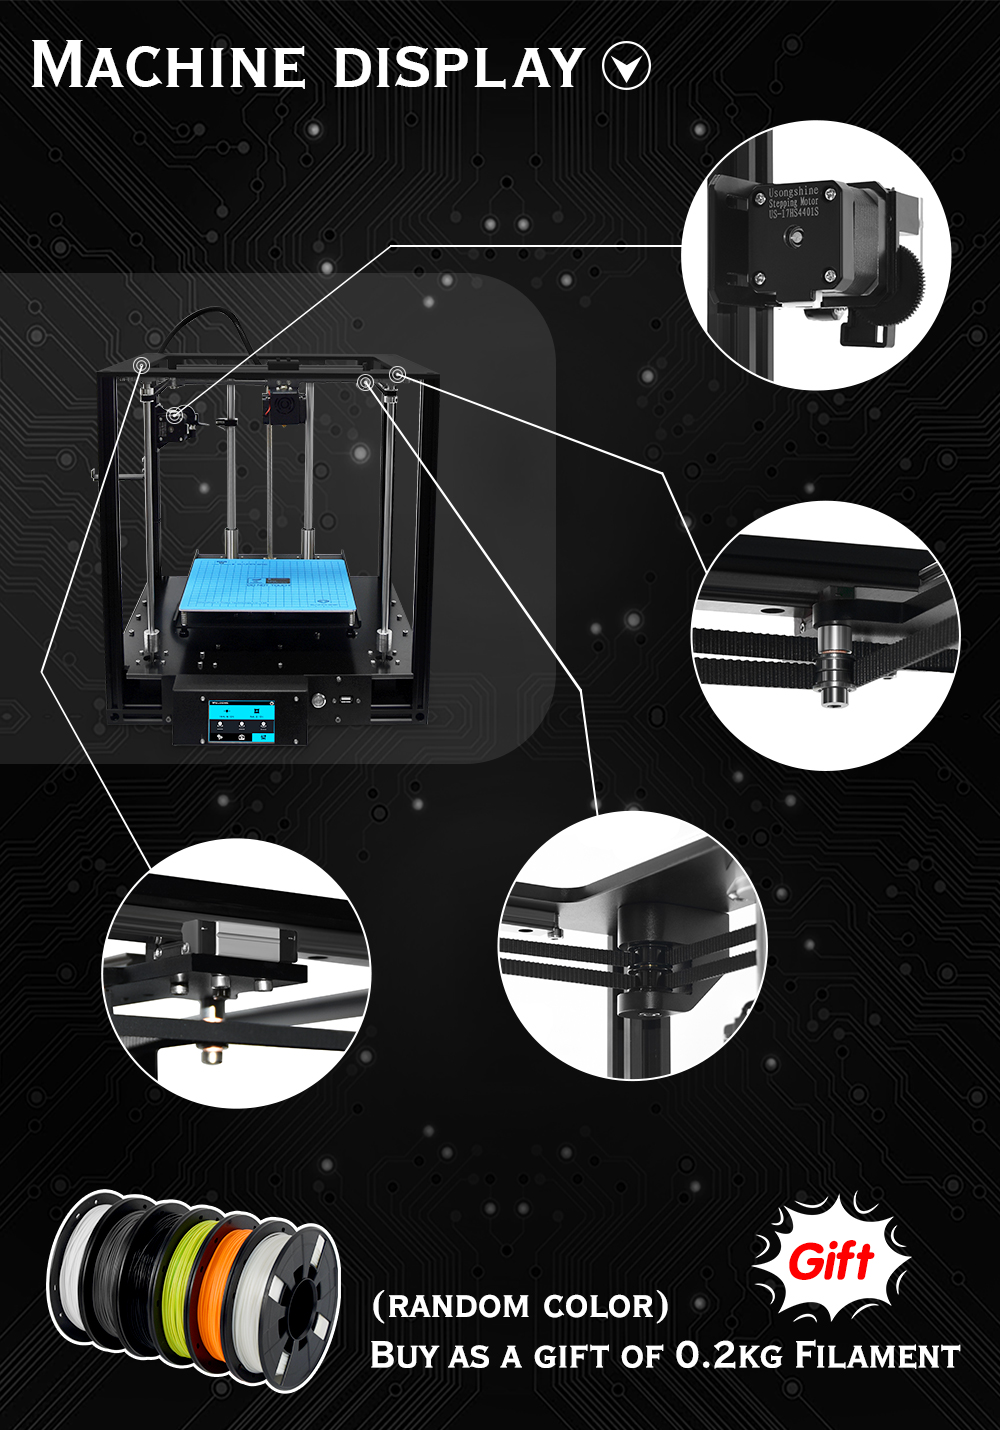 Two Trees® SAPPHIRE-S Corexy Structure Aluminium DIY 3D Printer 220*220*200mm Printing Size With Lerdge-X Mainboard/Power Resume/Off-line Print/3.5 in 14